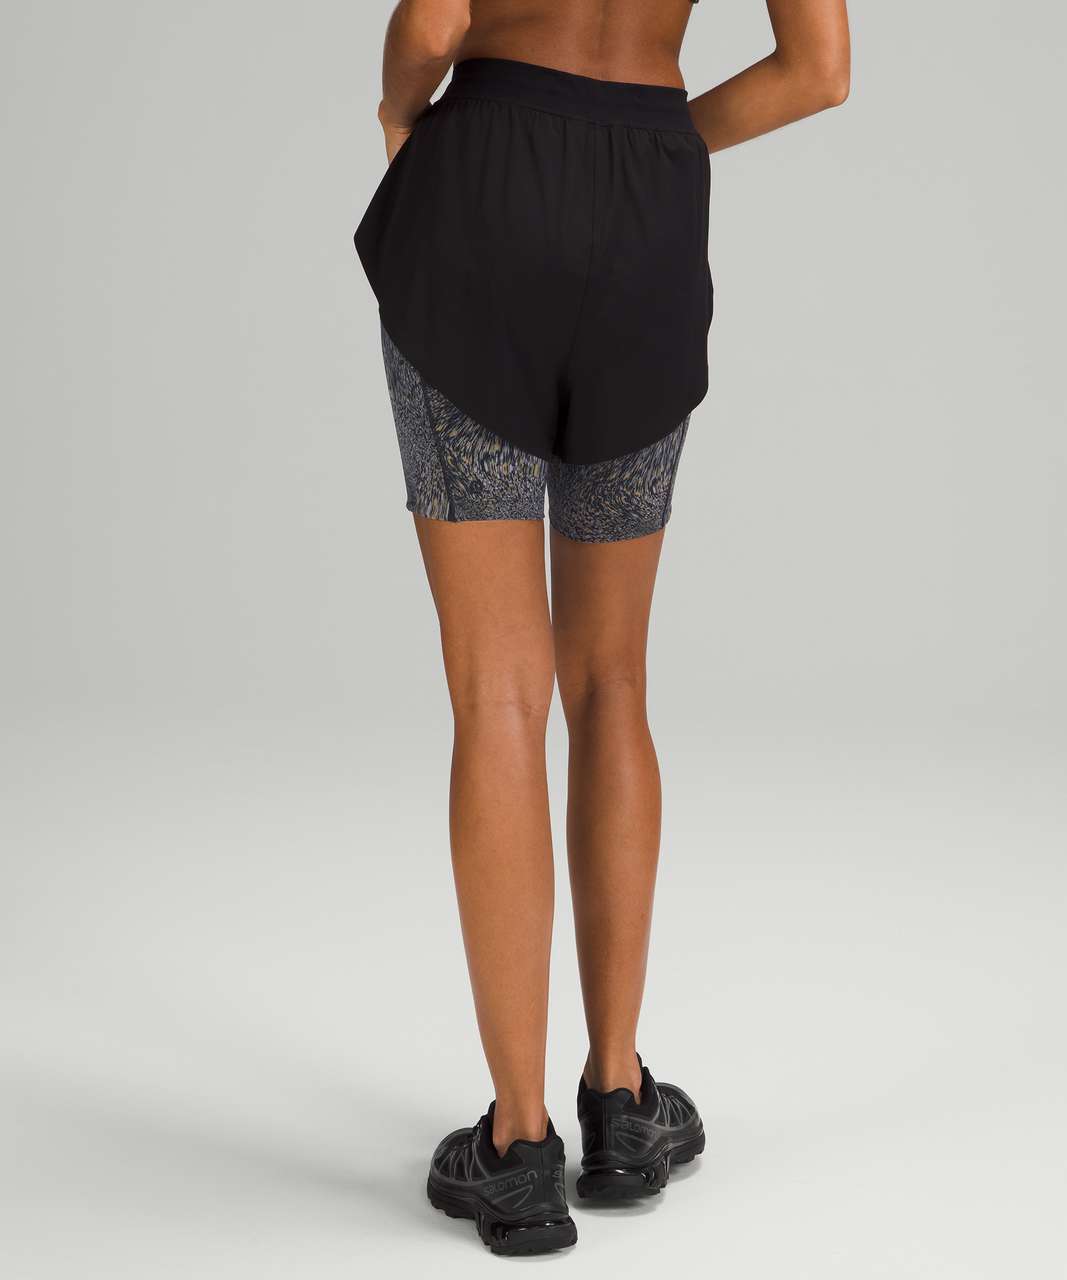 I ran a half marathon in these Lululemon running shorts and they're 42% off  for Black Friday